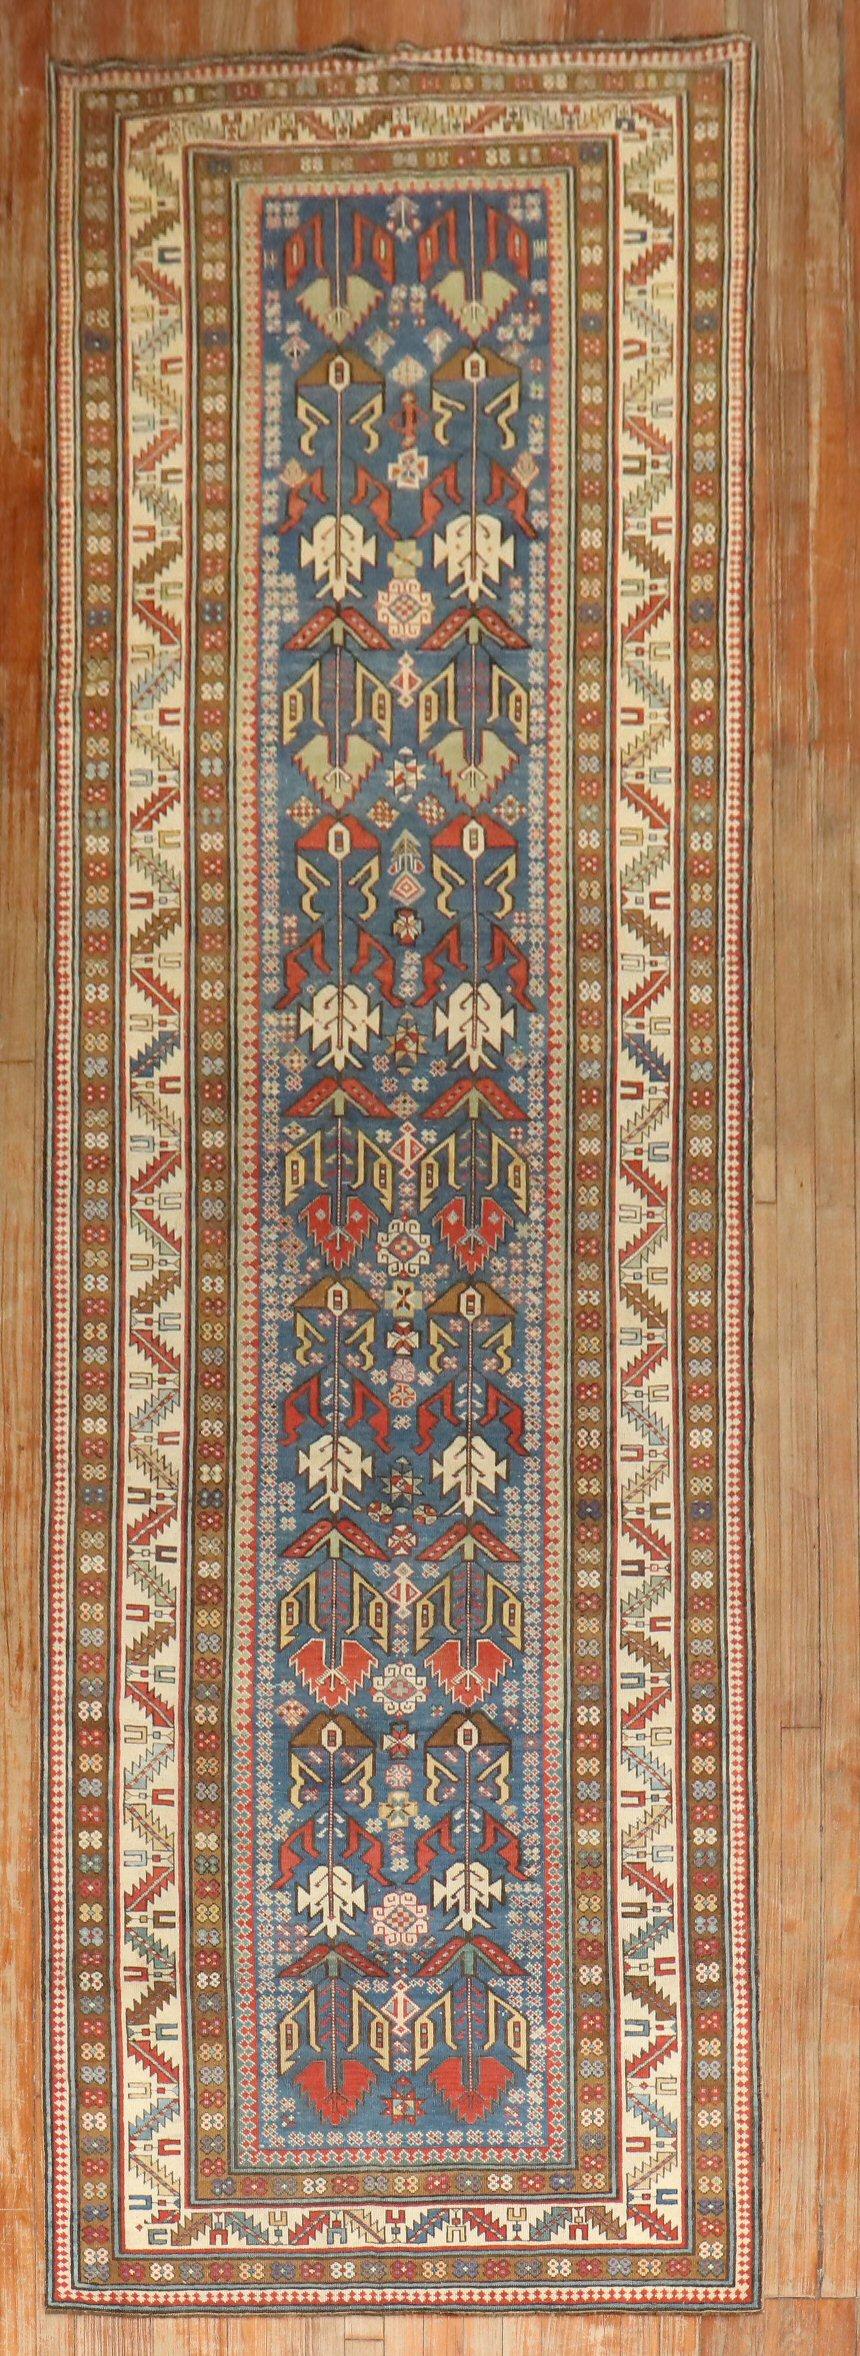 19th century kuba shirvan antique runner  with a tribal pattern  on a soft blue field

Measures: 3'5'' x 12'2''.